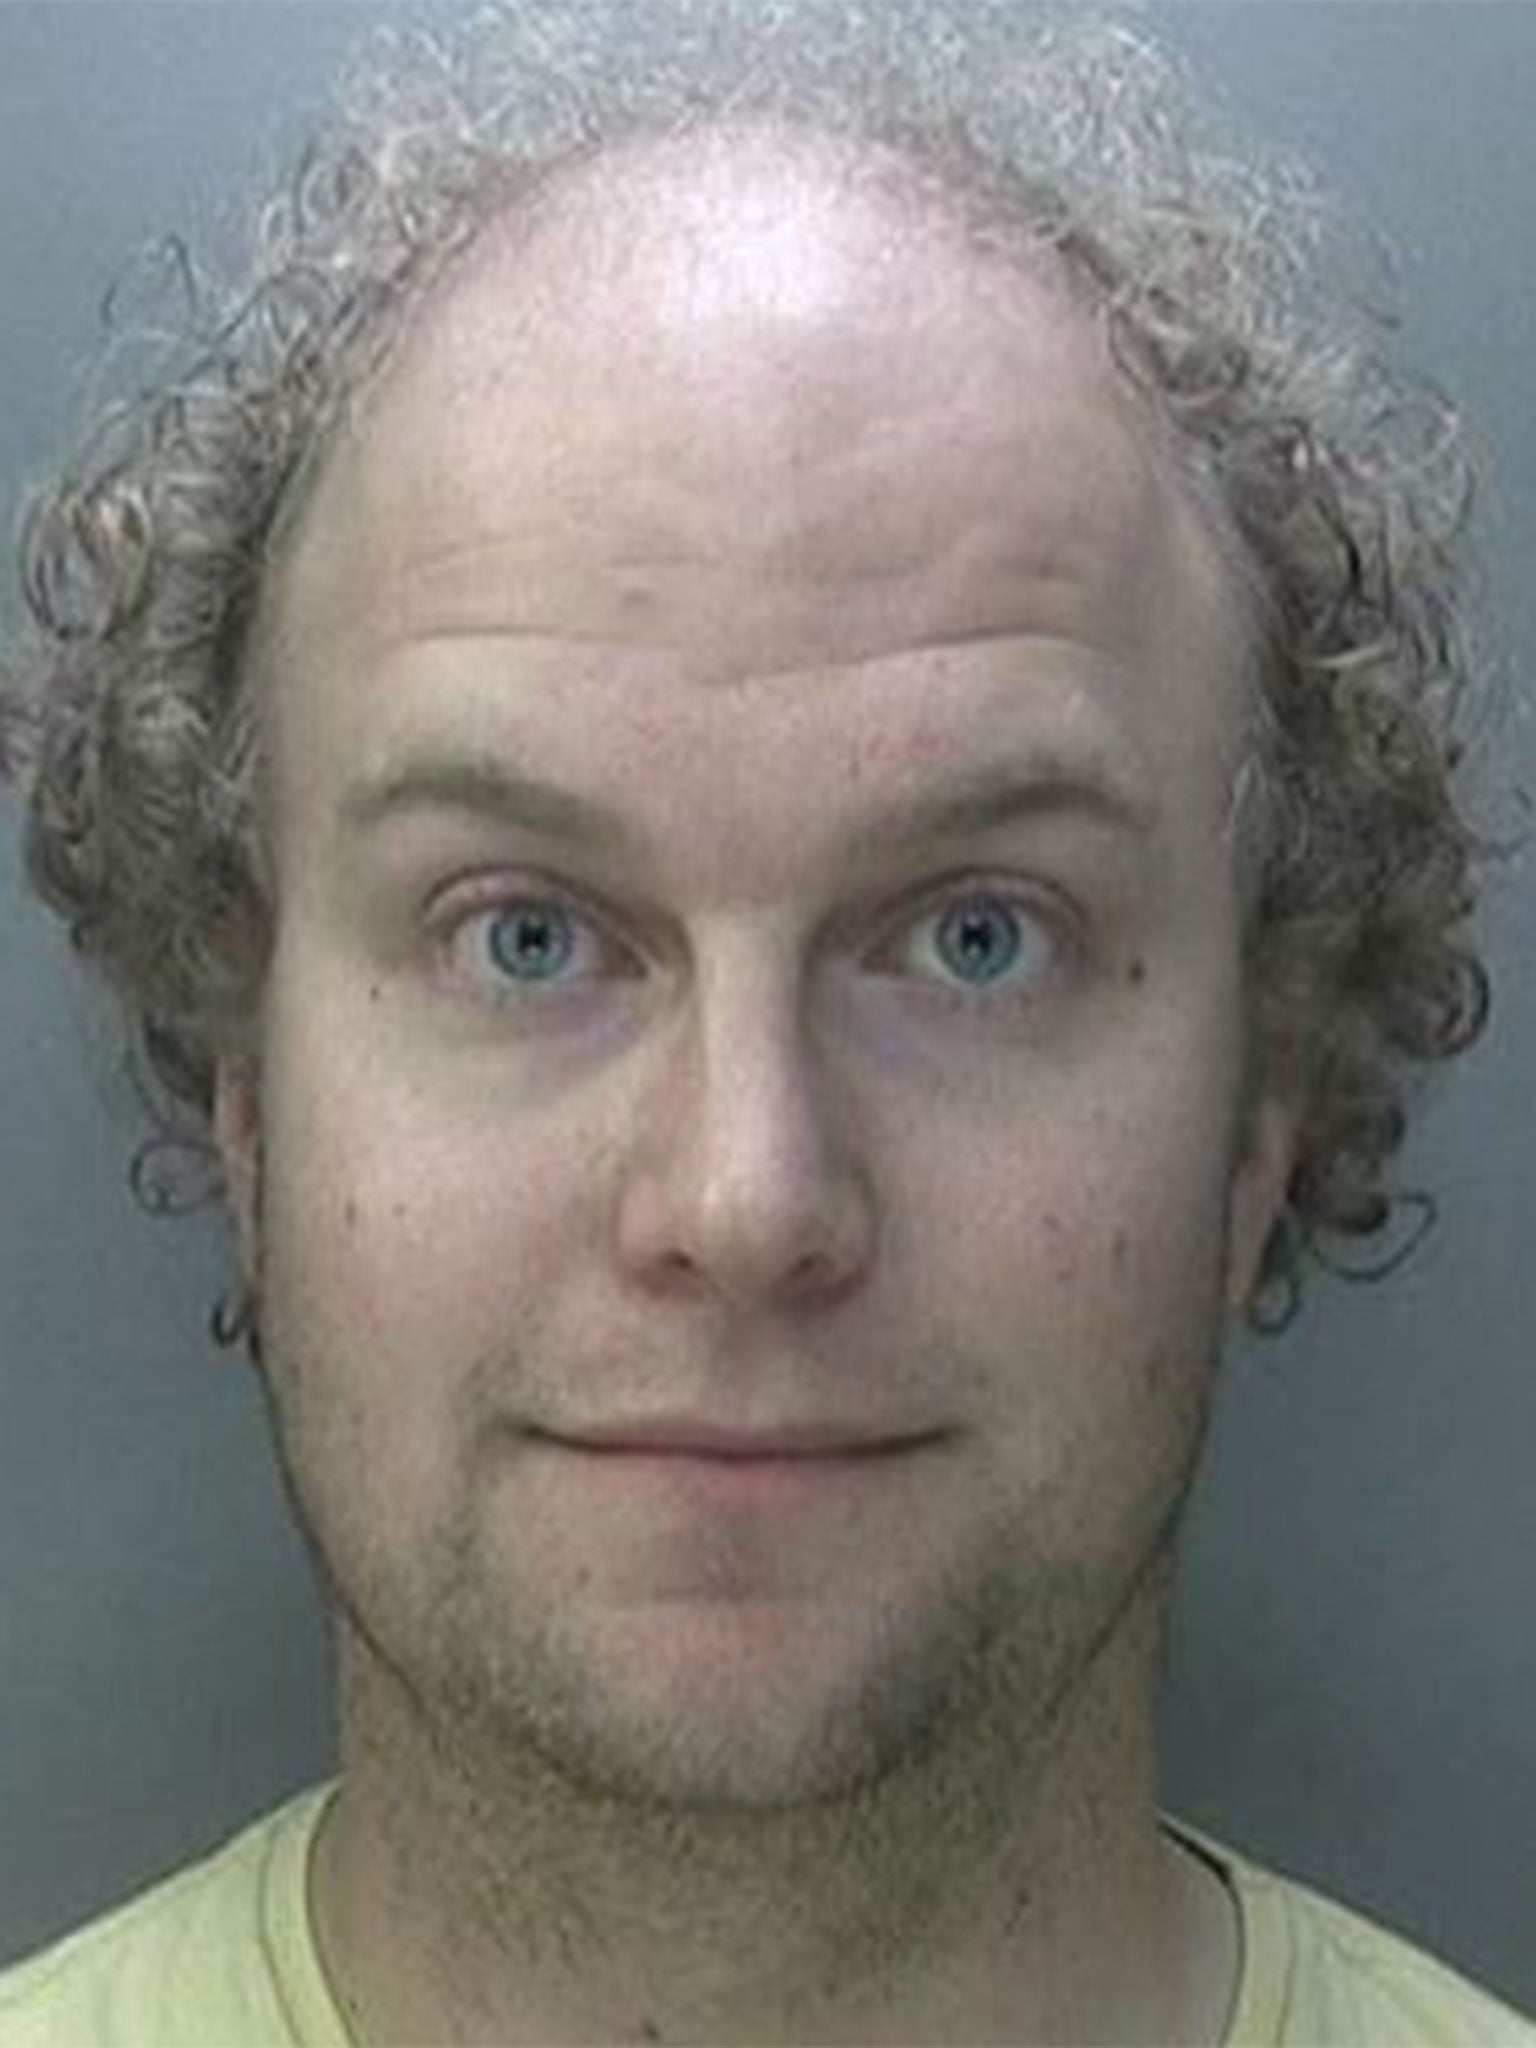 Matthew Falder, an academic from Birmingham, was jailed for 32 years